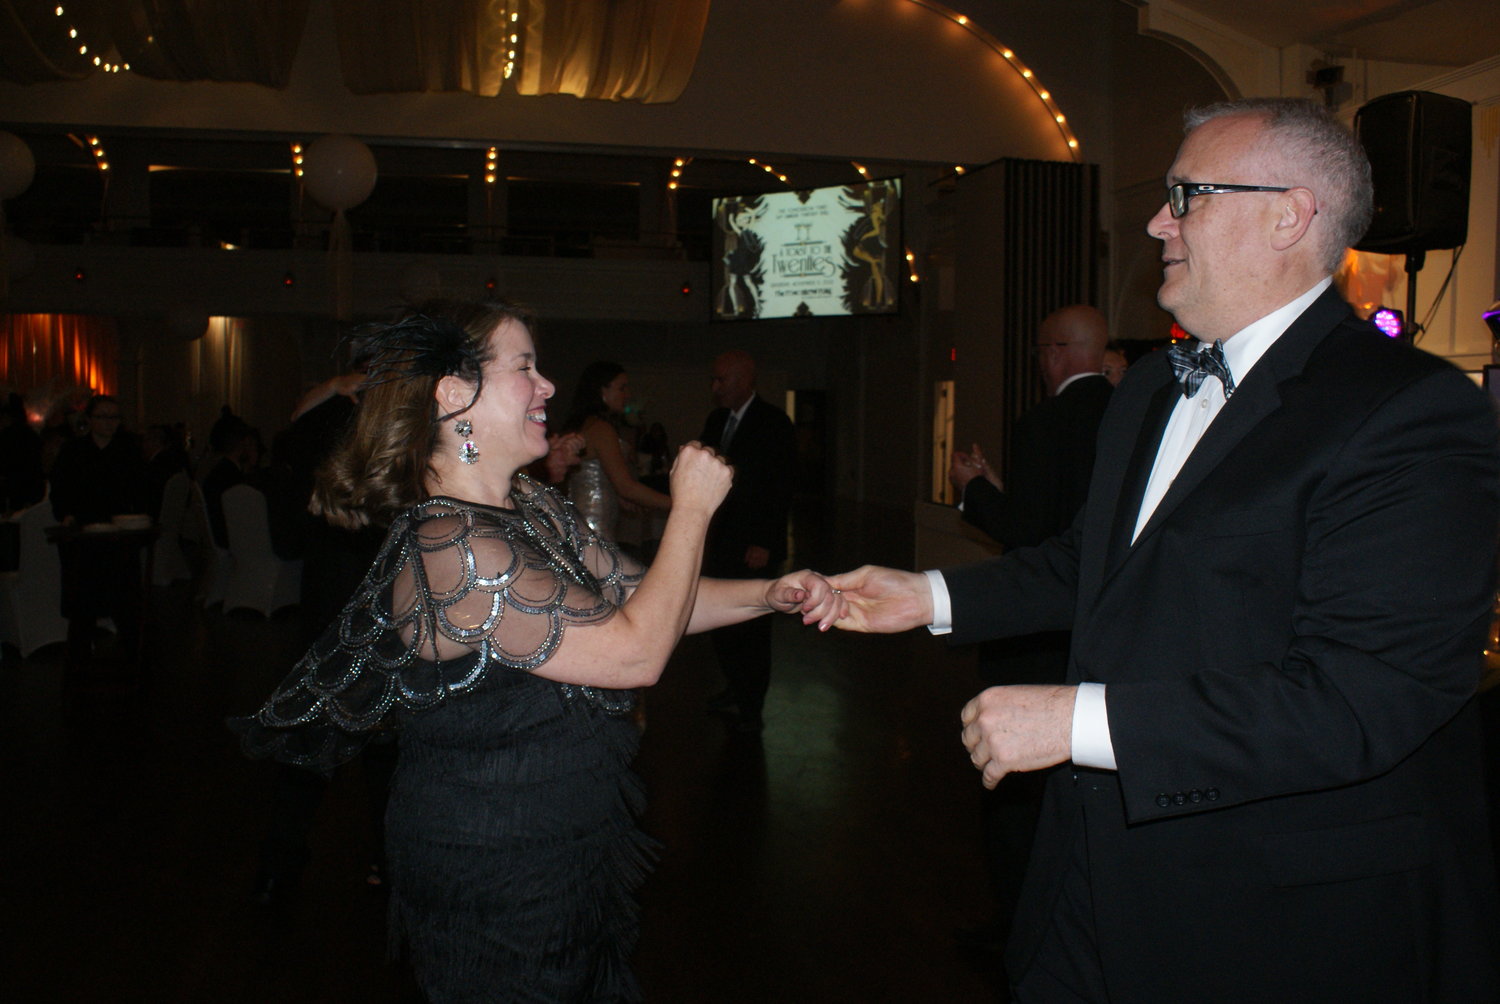 GETTING INTO THE SWING OF THINGS: In a night of supporting a great cause, guests enjoyed grooving on the dance floor.